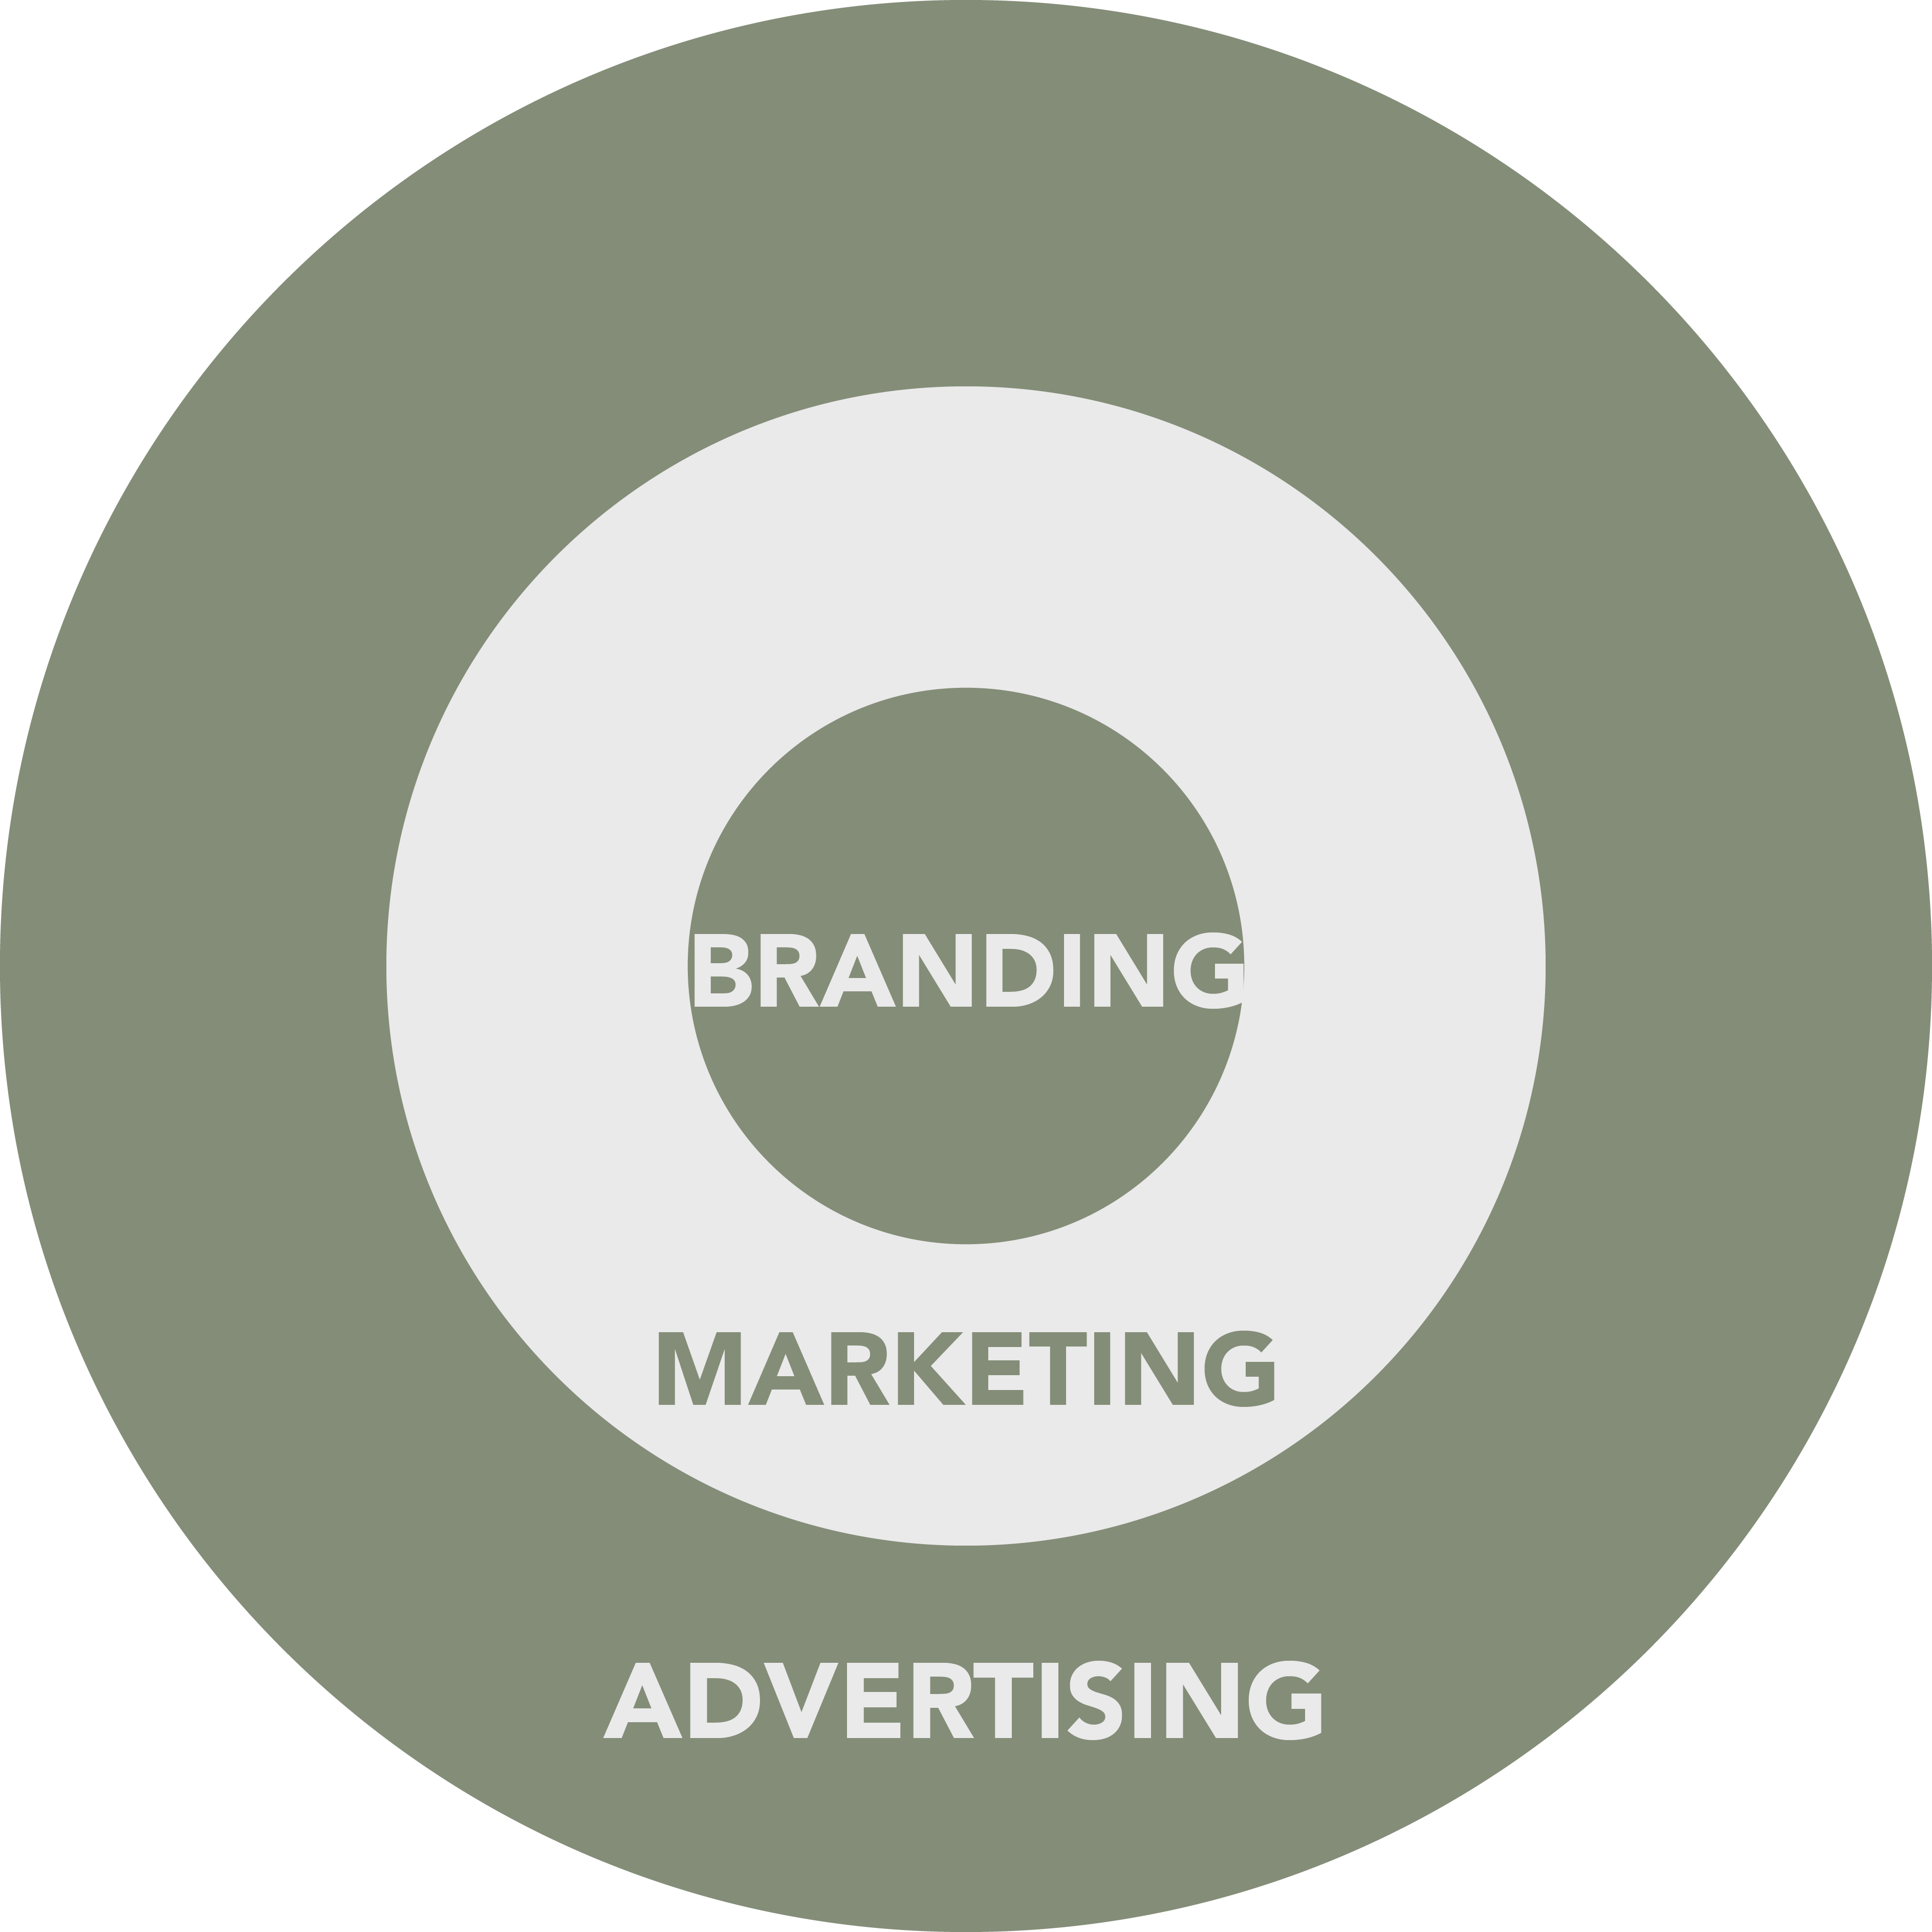 bullseye graphic used to represent brand strategy. Branding is at the center, marketing next, with advertising on the outside.